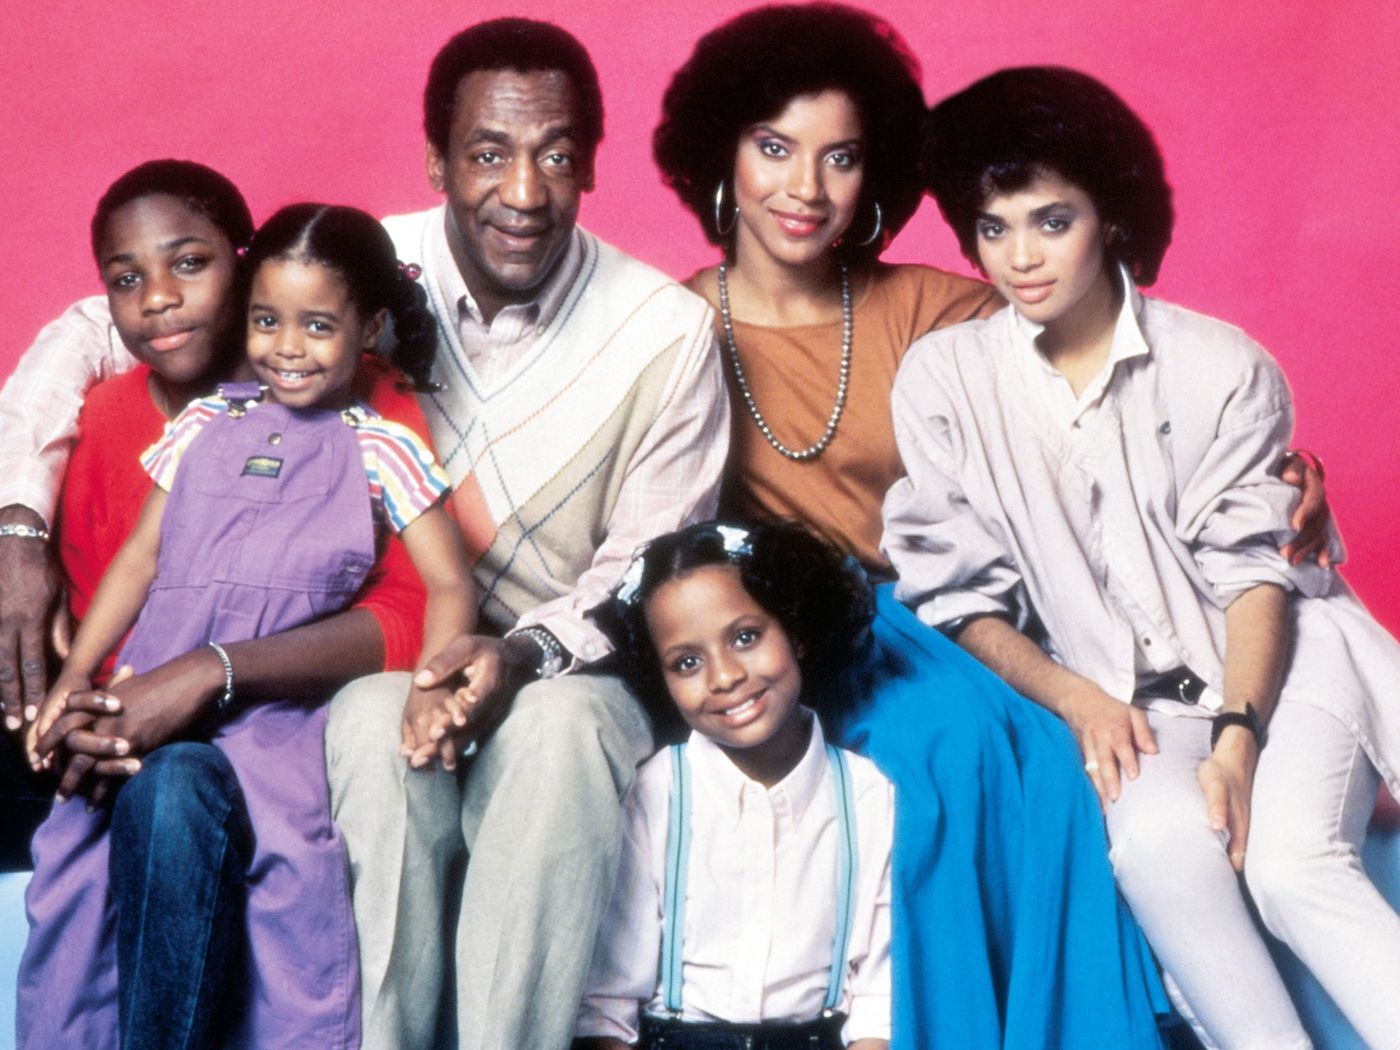 amanda buoni recommends Not The Cosby Show